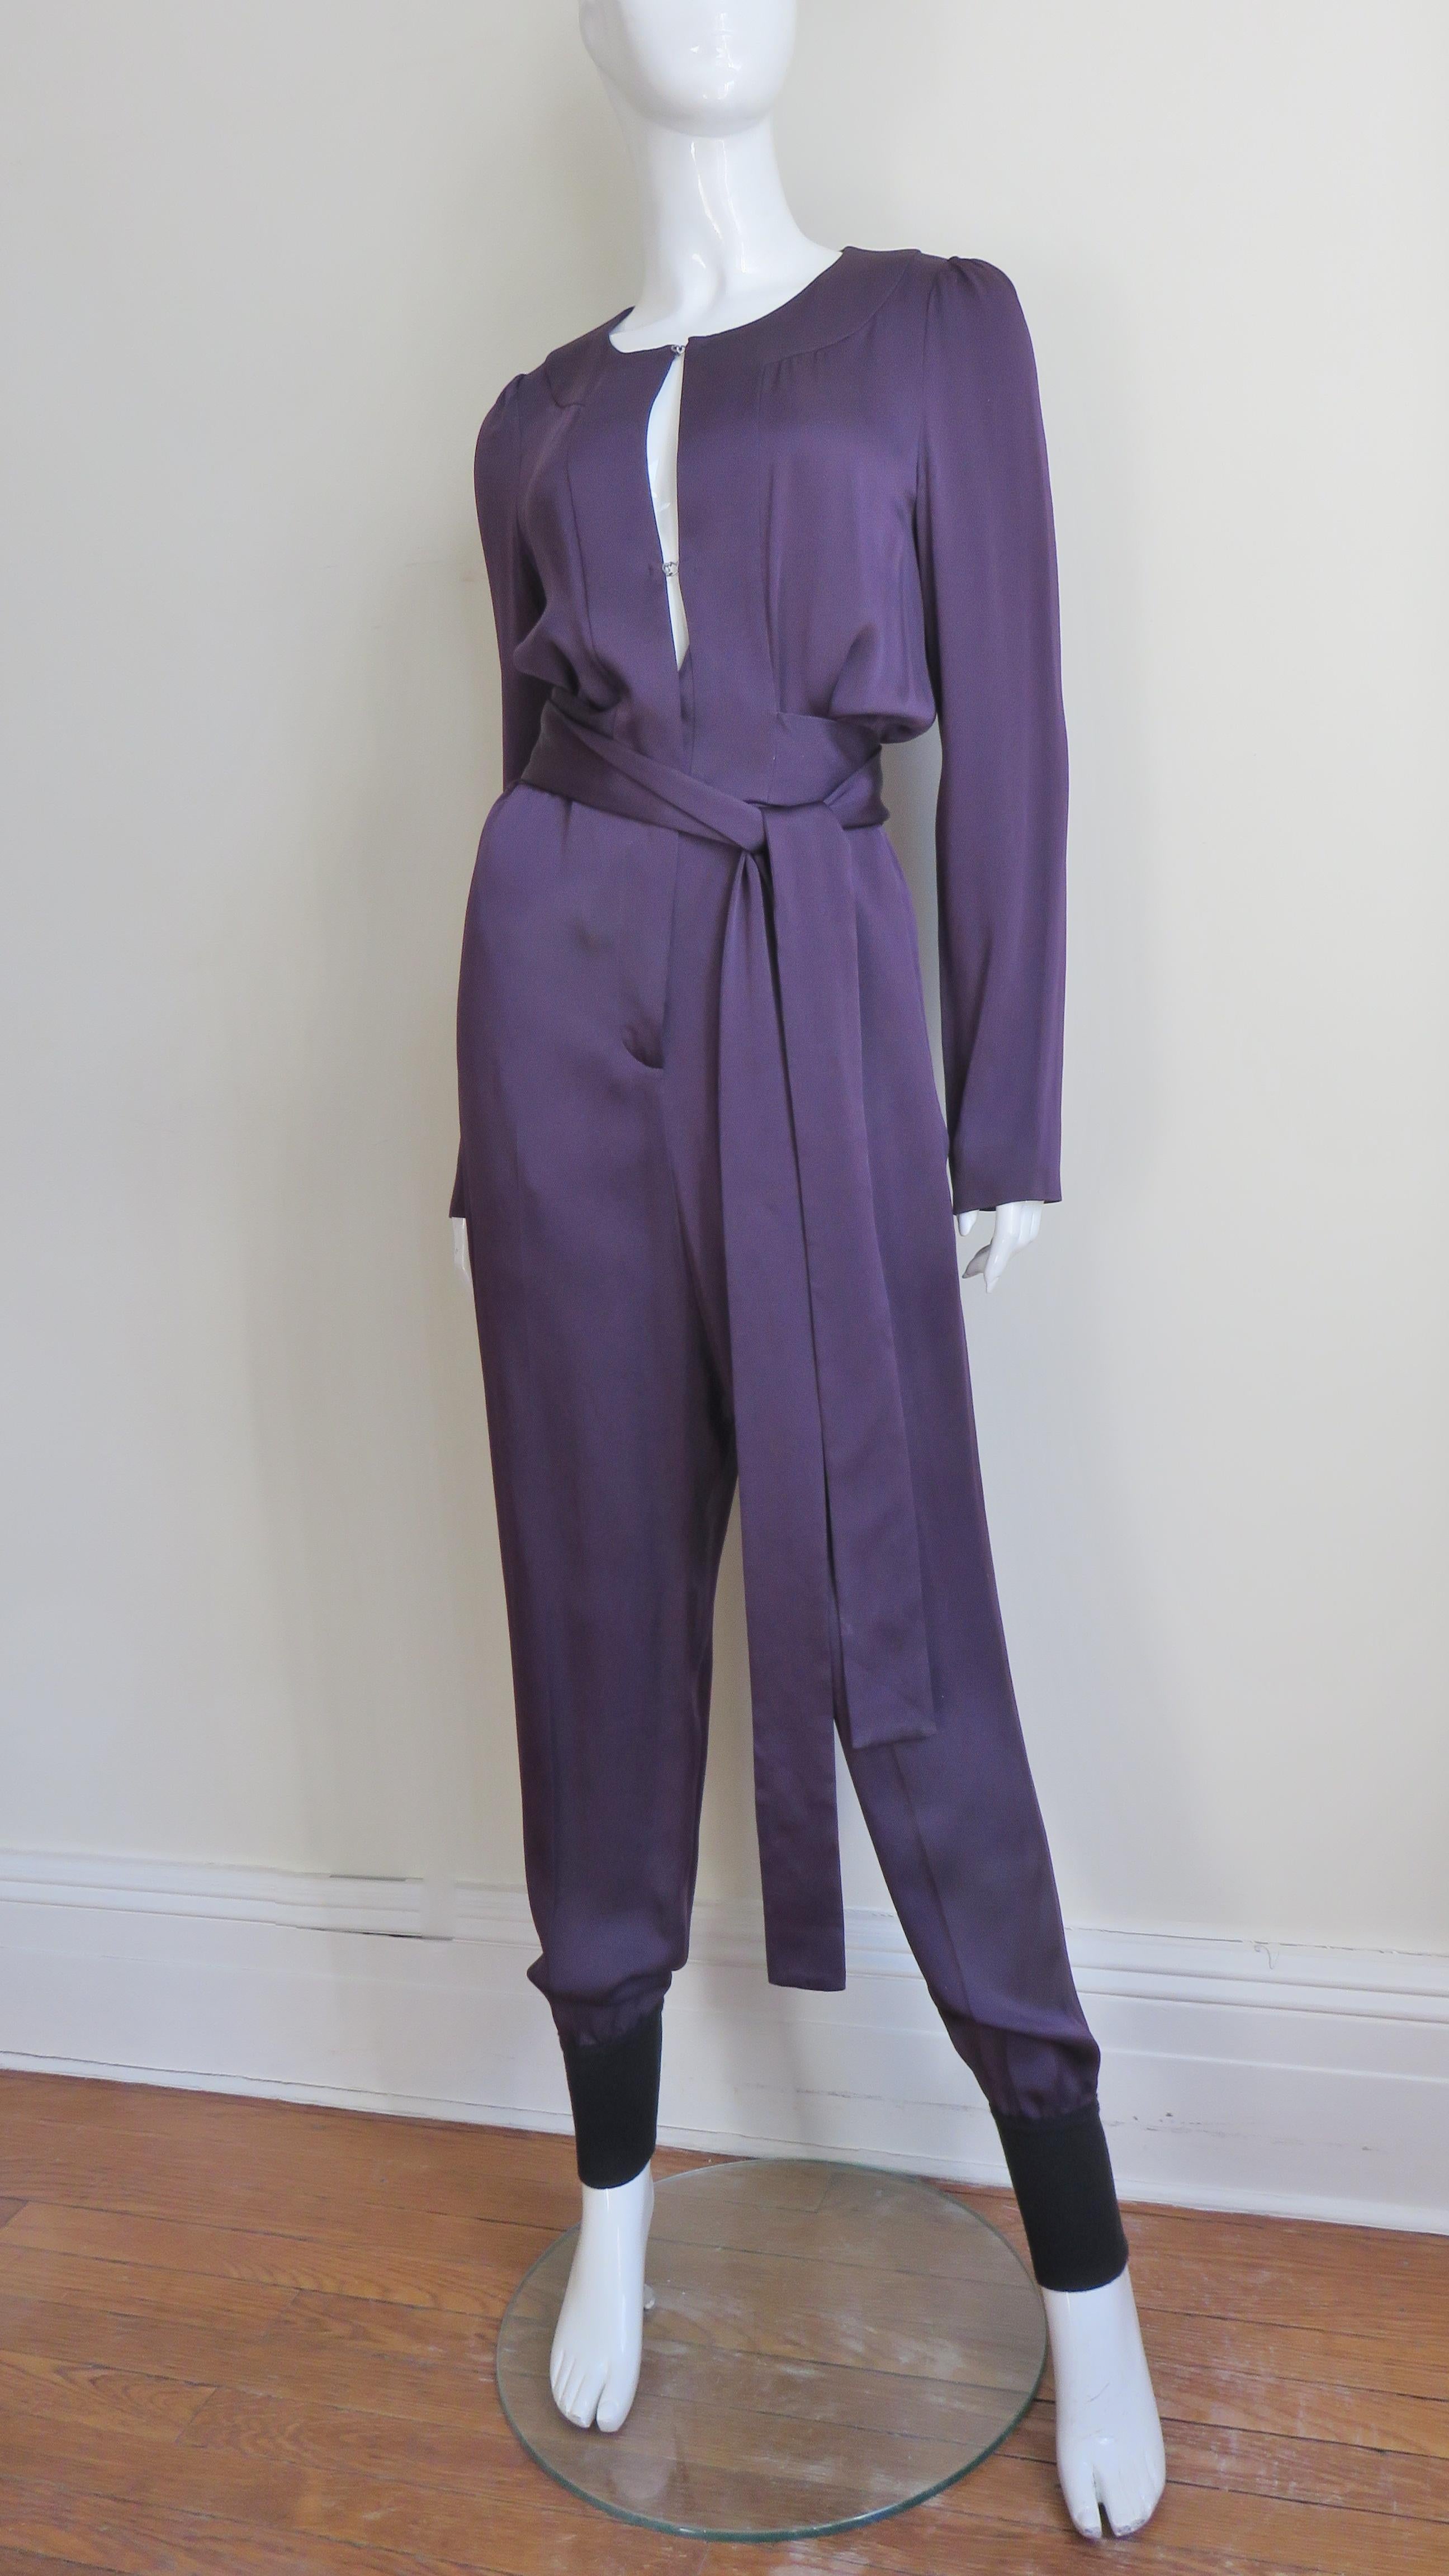  A fabulous eggplant purple jumpsuit from Sonia Rykiel.  It is collarless with a keyhole front closing with several silver hooks revealing a sliver of skin.  It has long sleeves, cuffed legs on the pants, hip side seam pockets and a long wrap belt